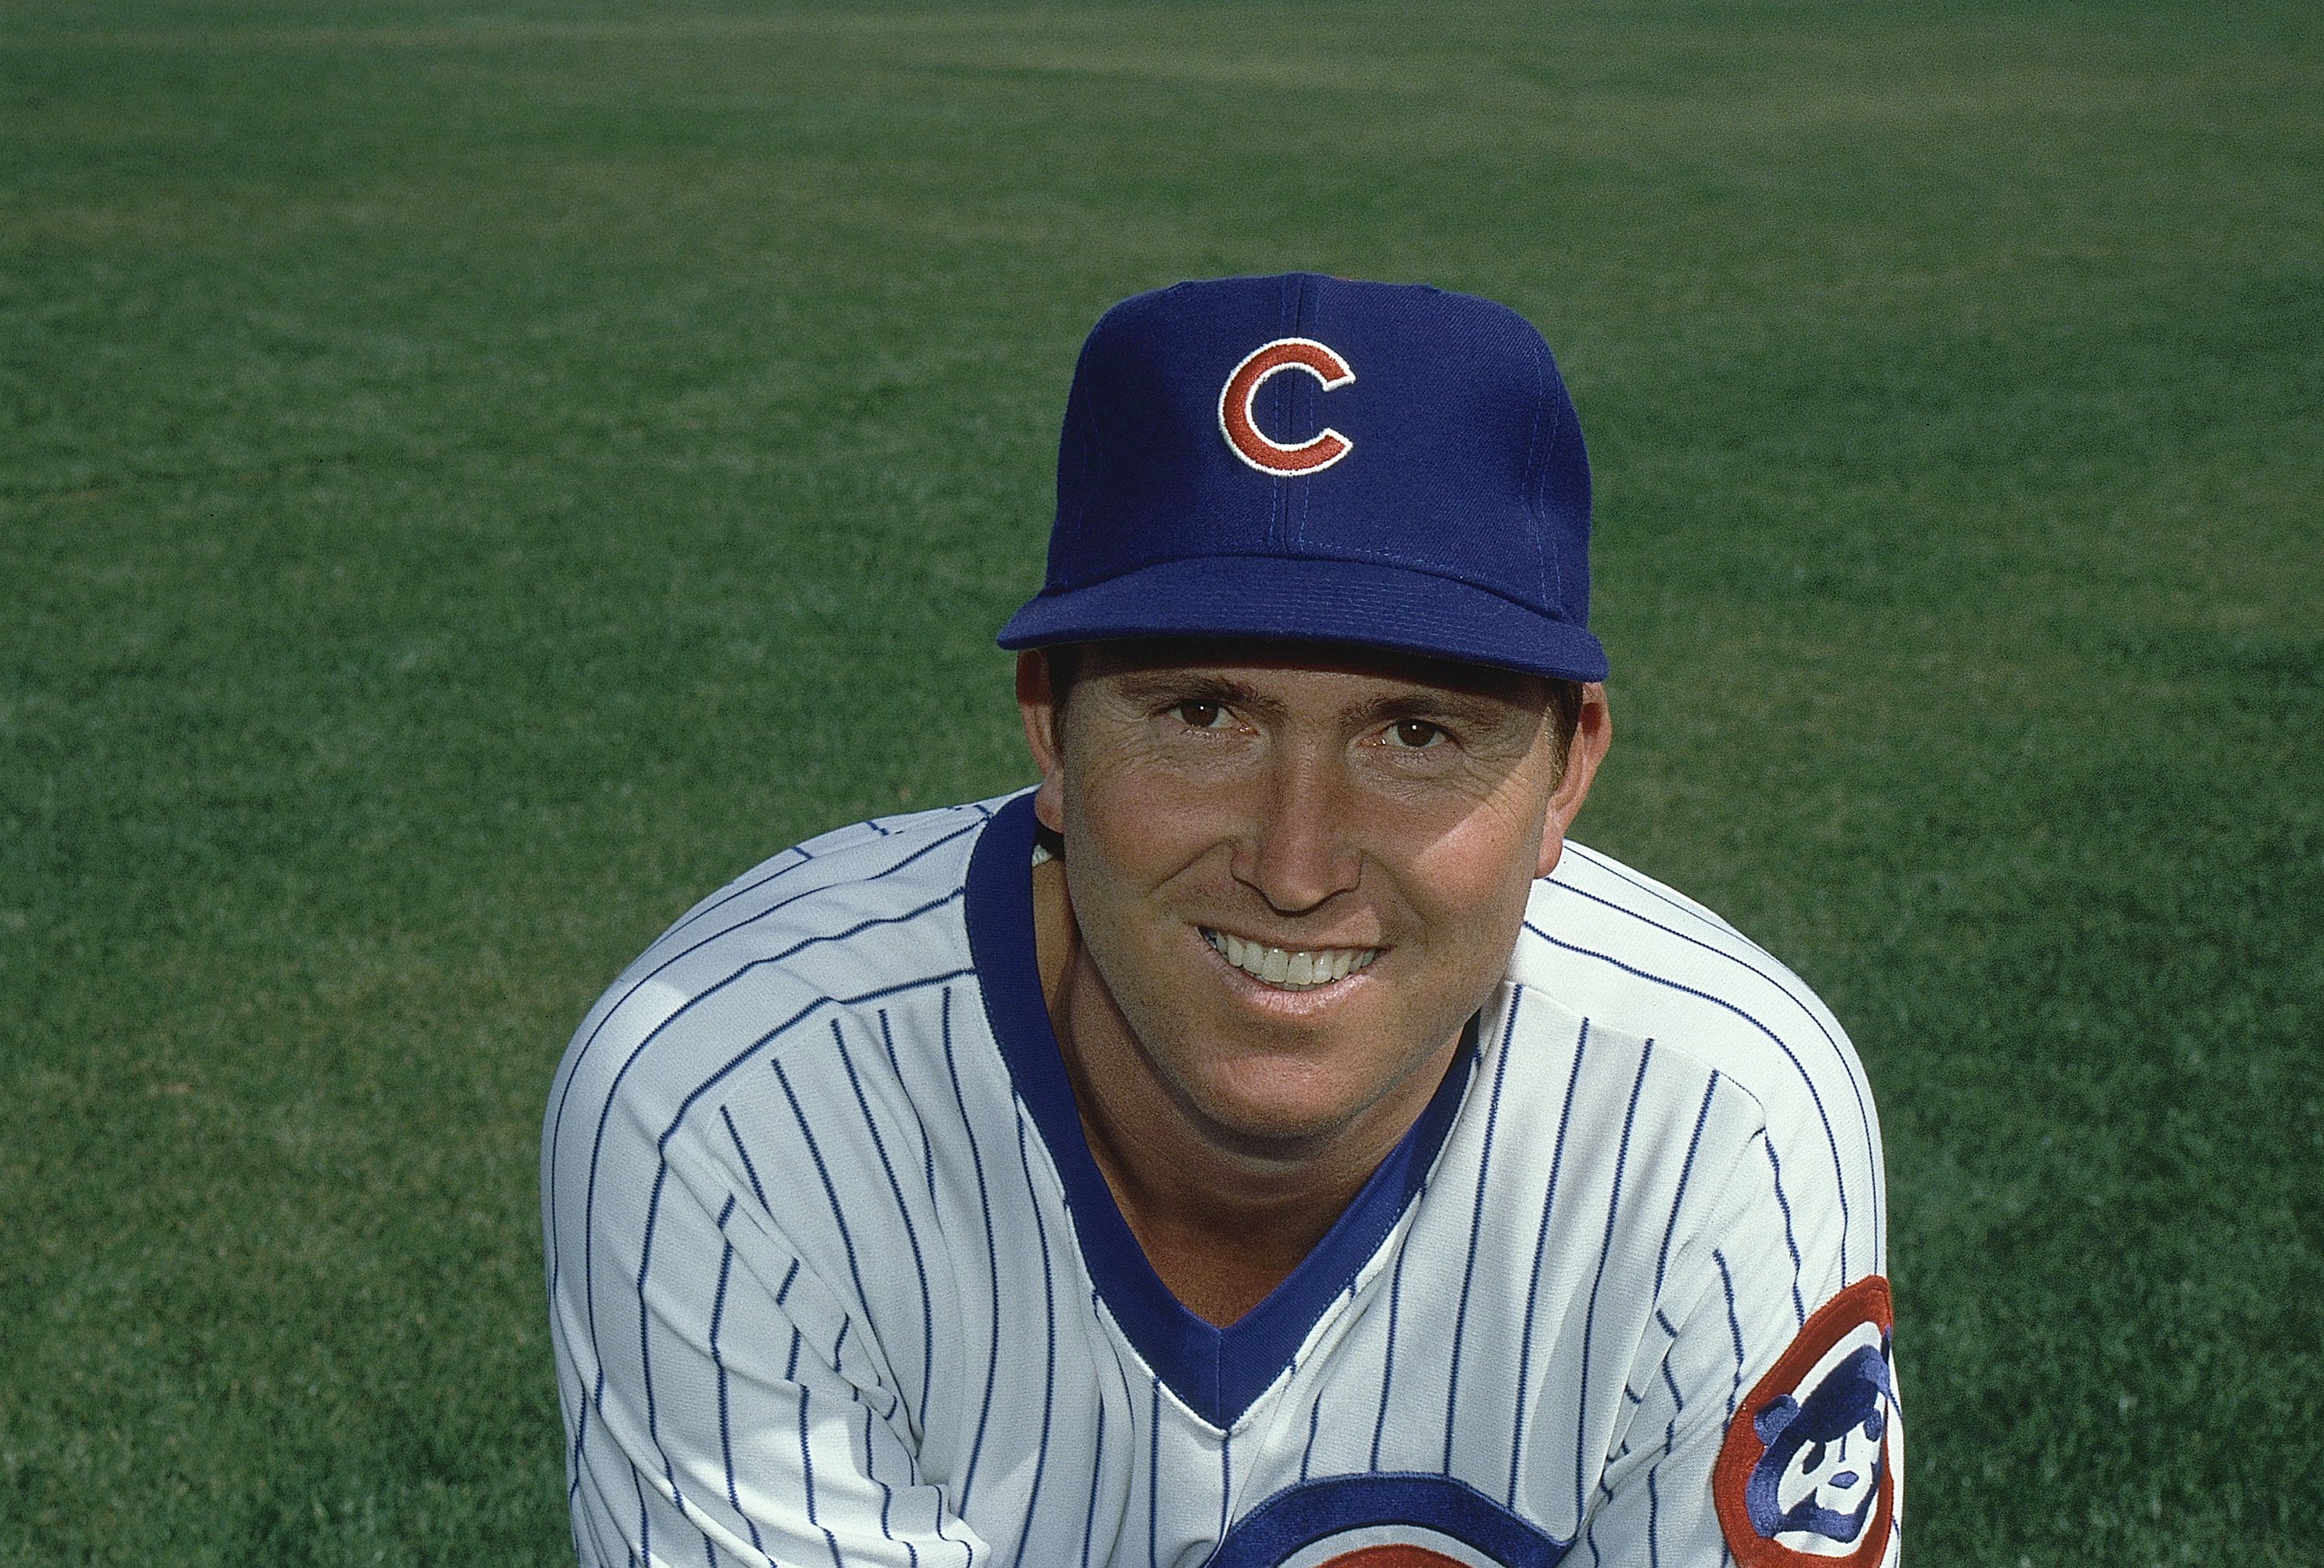 Does former Cubs pitcher and Camp Point native Rick Reuschel belong in the  Hall of Fame?